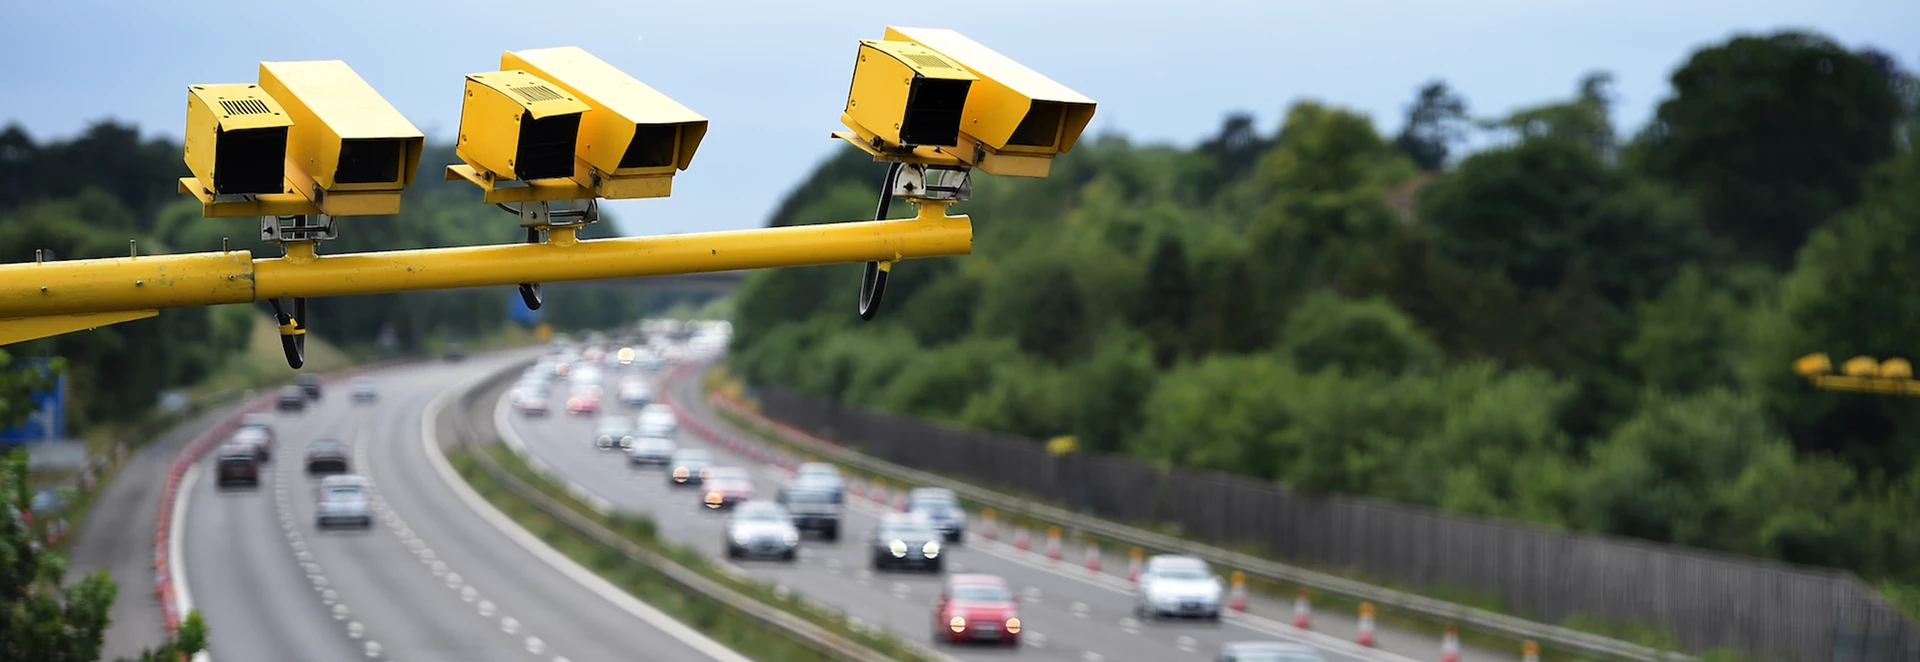 Drivers could face £100 fine for going 1mph over the speed limit